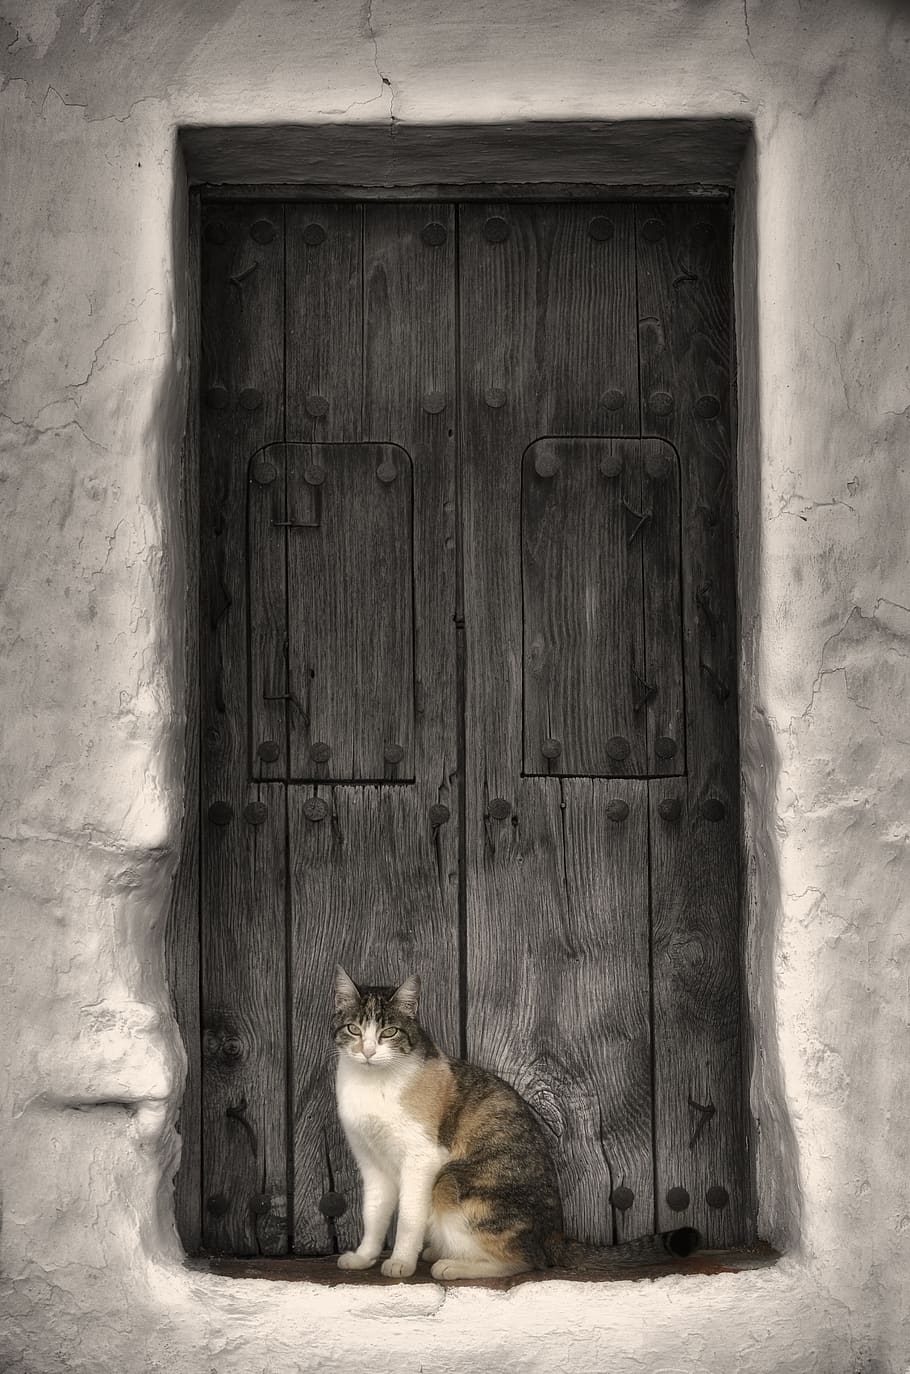 Short-fur White and Black Cat in Front of Door, abandoned, classic